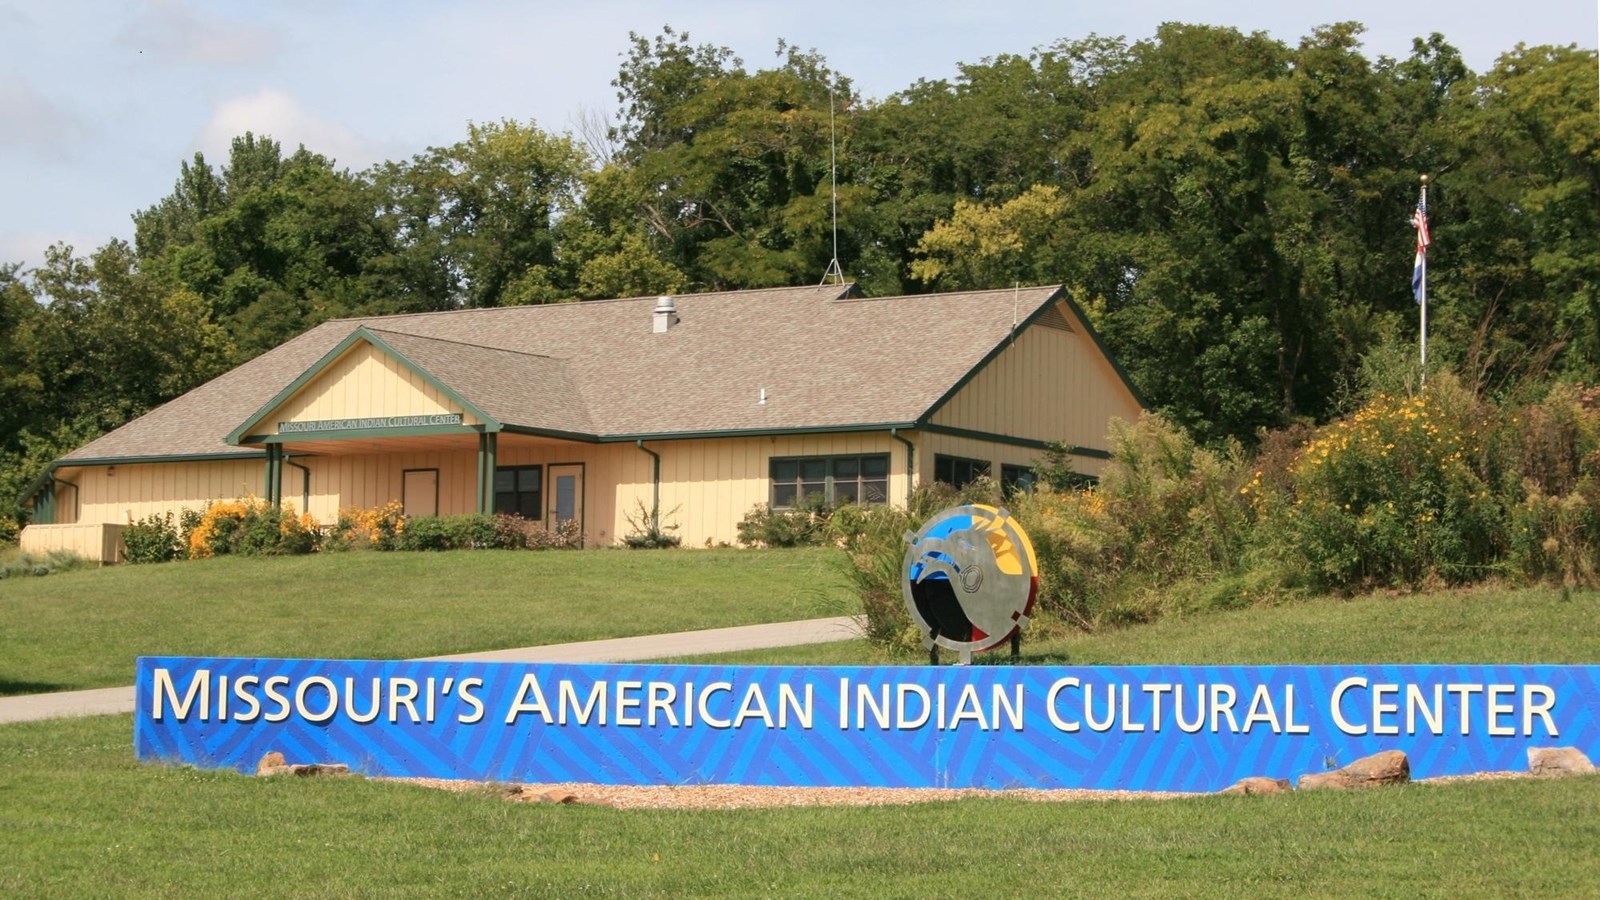 Blue sign reading, “Missouri’s American Indian Cultural Center” on a lawn in front a tan building